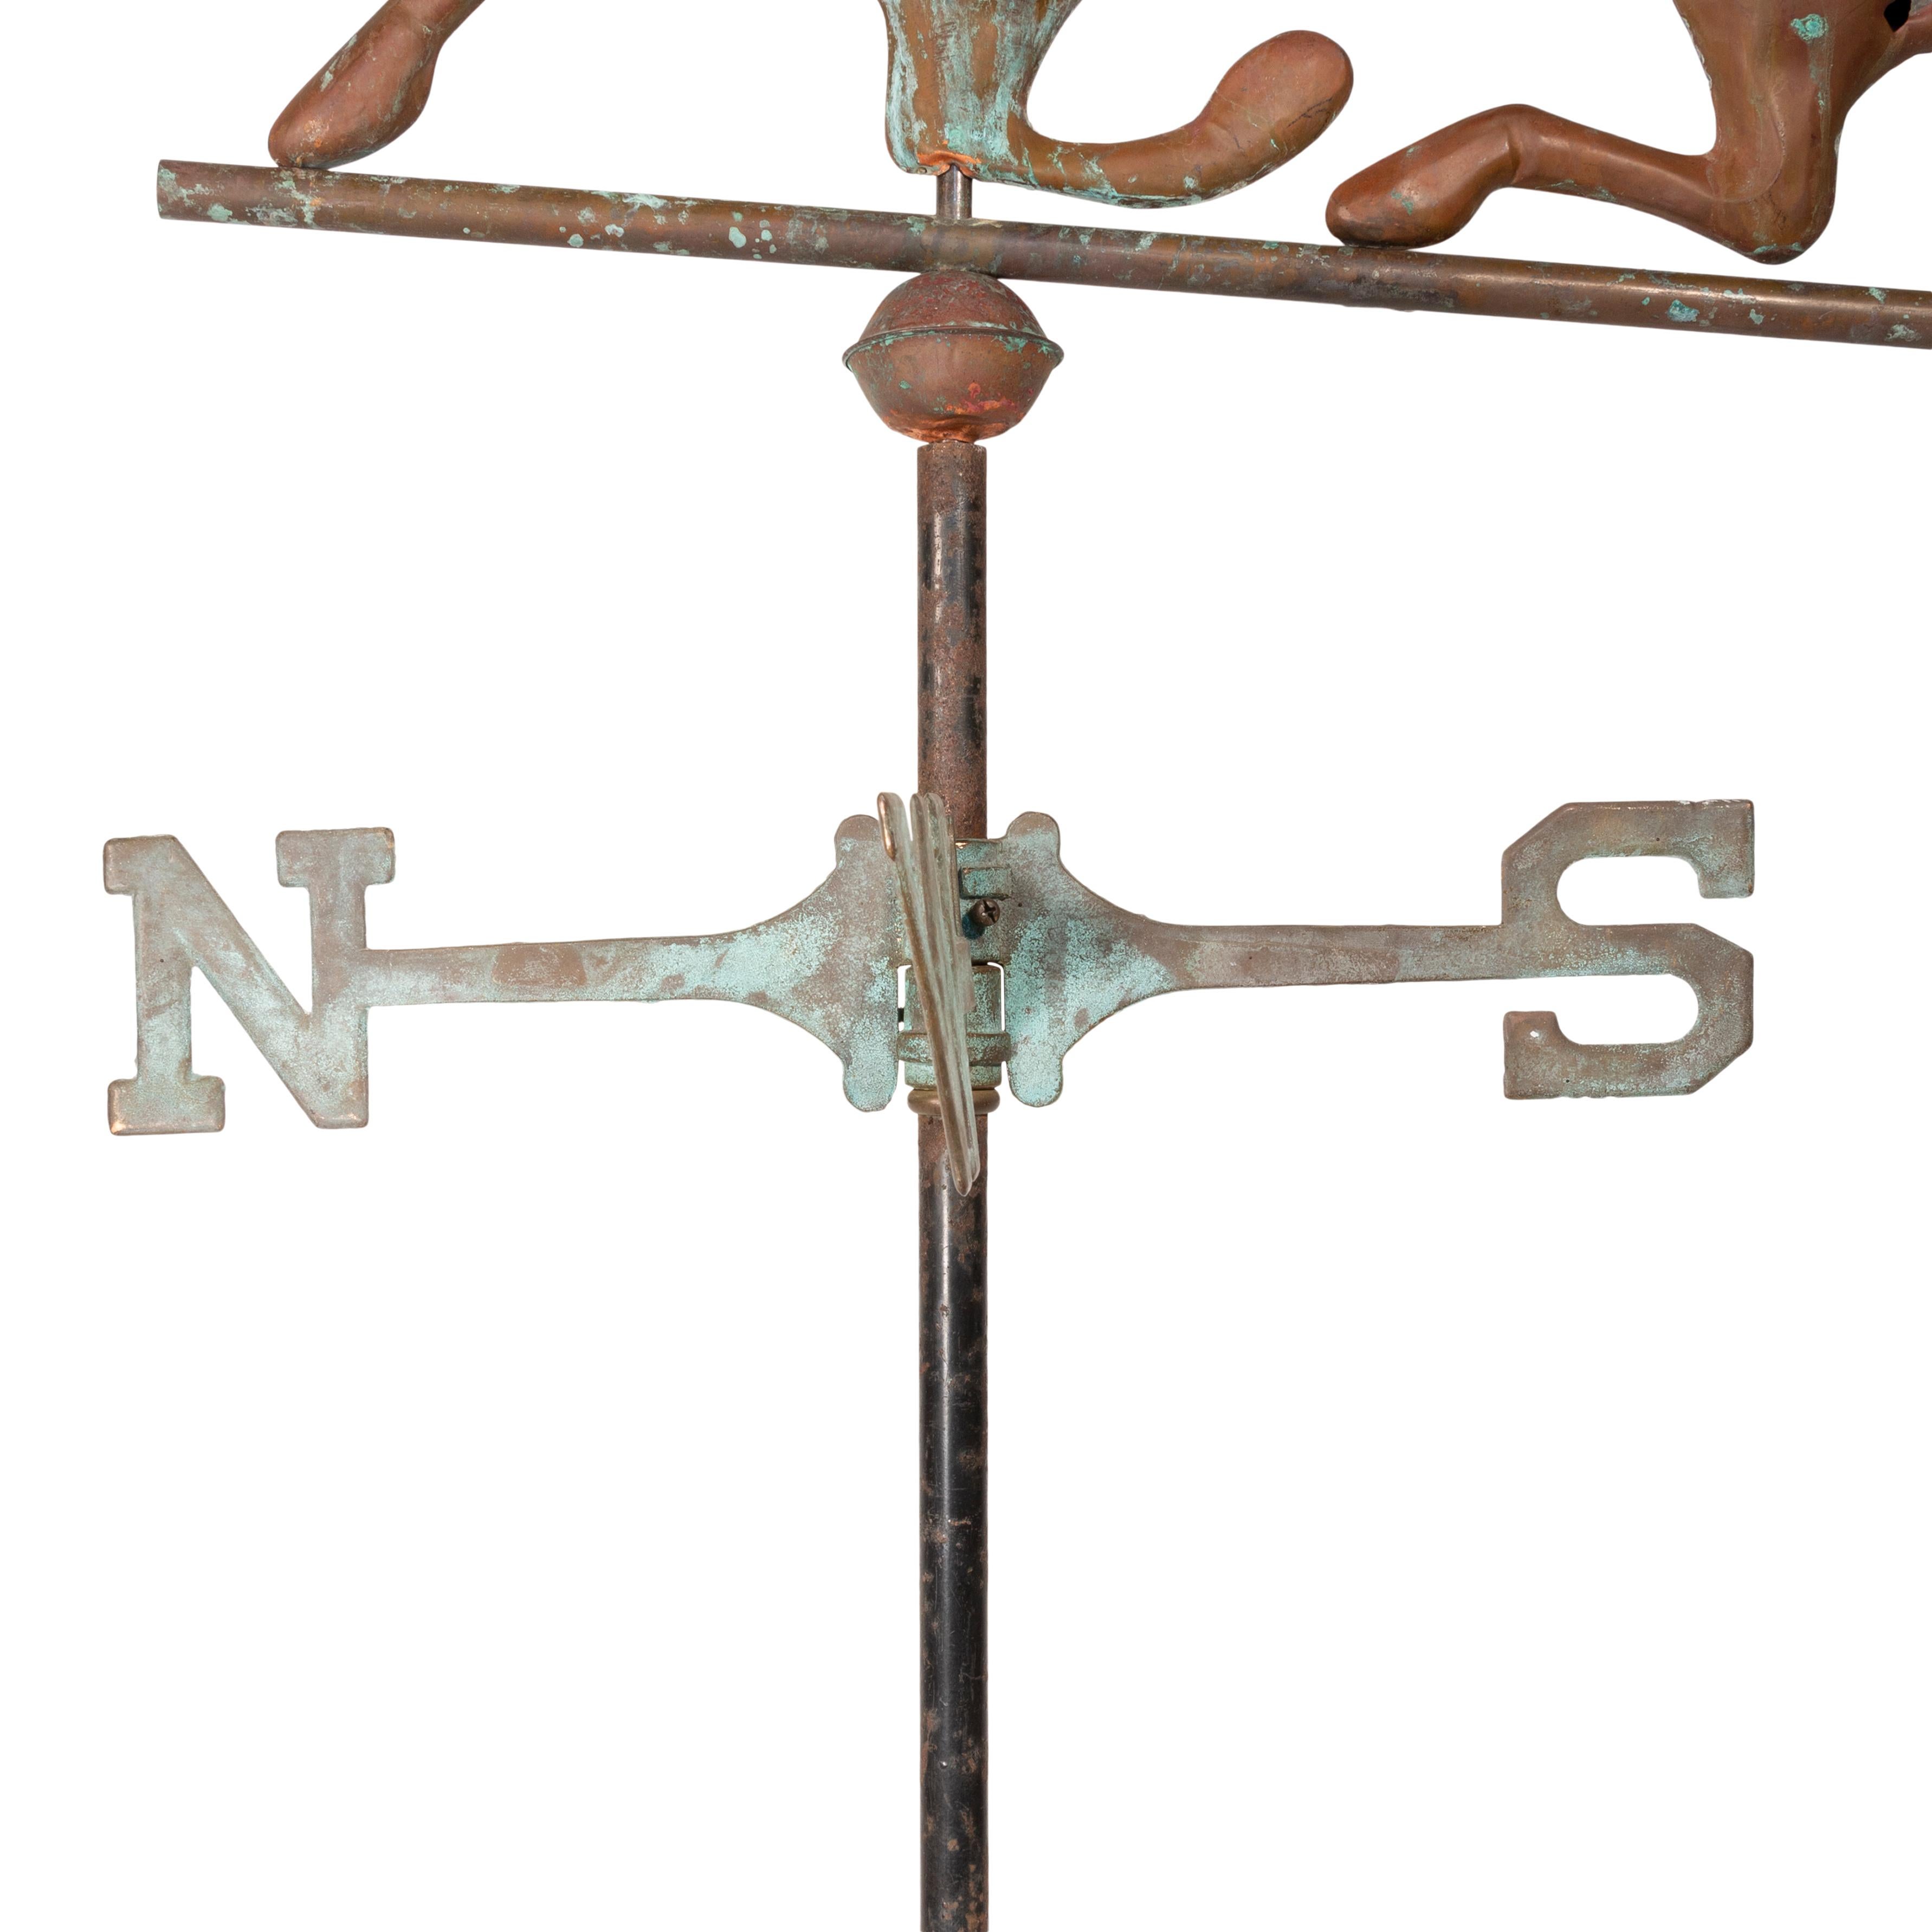 Antique 3D copper horse weather vane on directional rod. Patina and bullet holes to spare.

PERIOD: First quarter 20th Century
SIZE: Horse 28